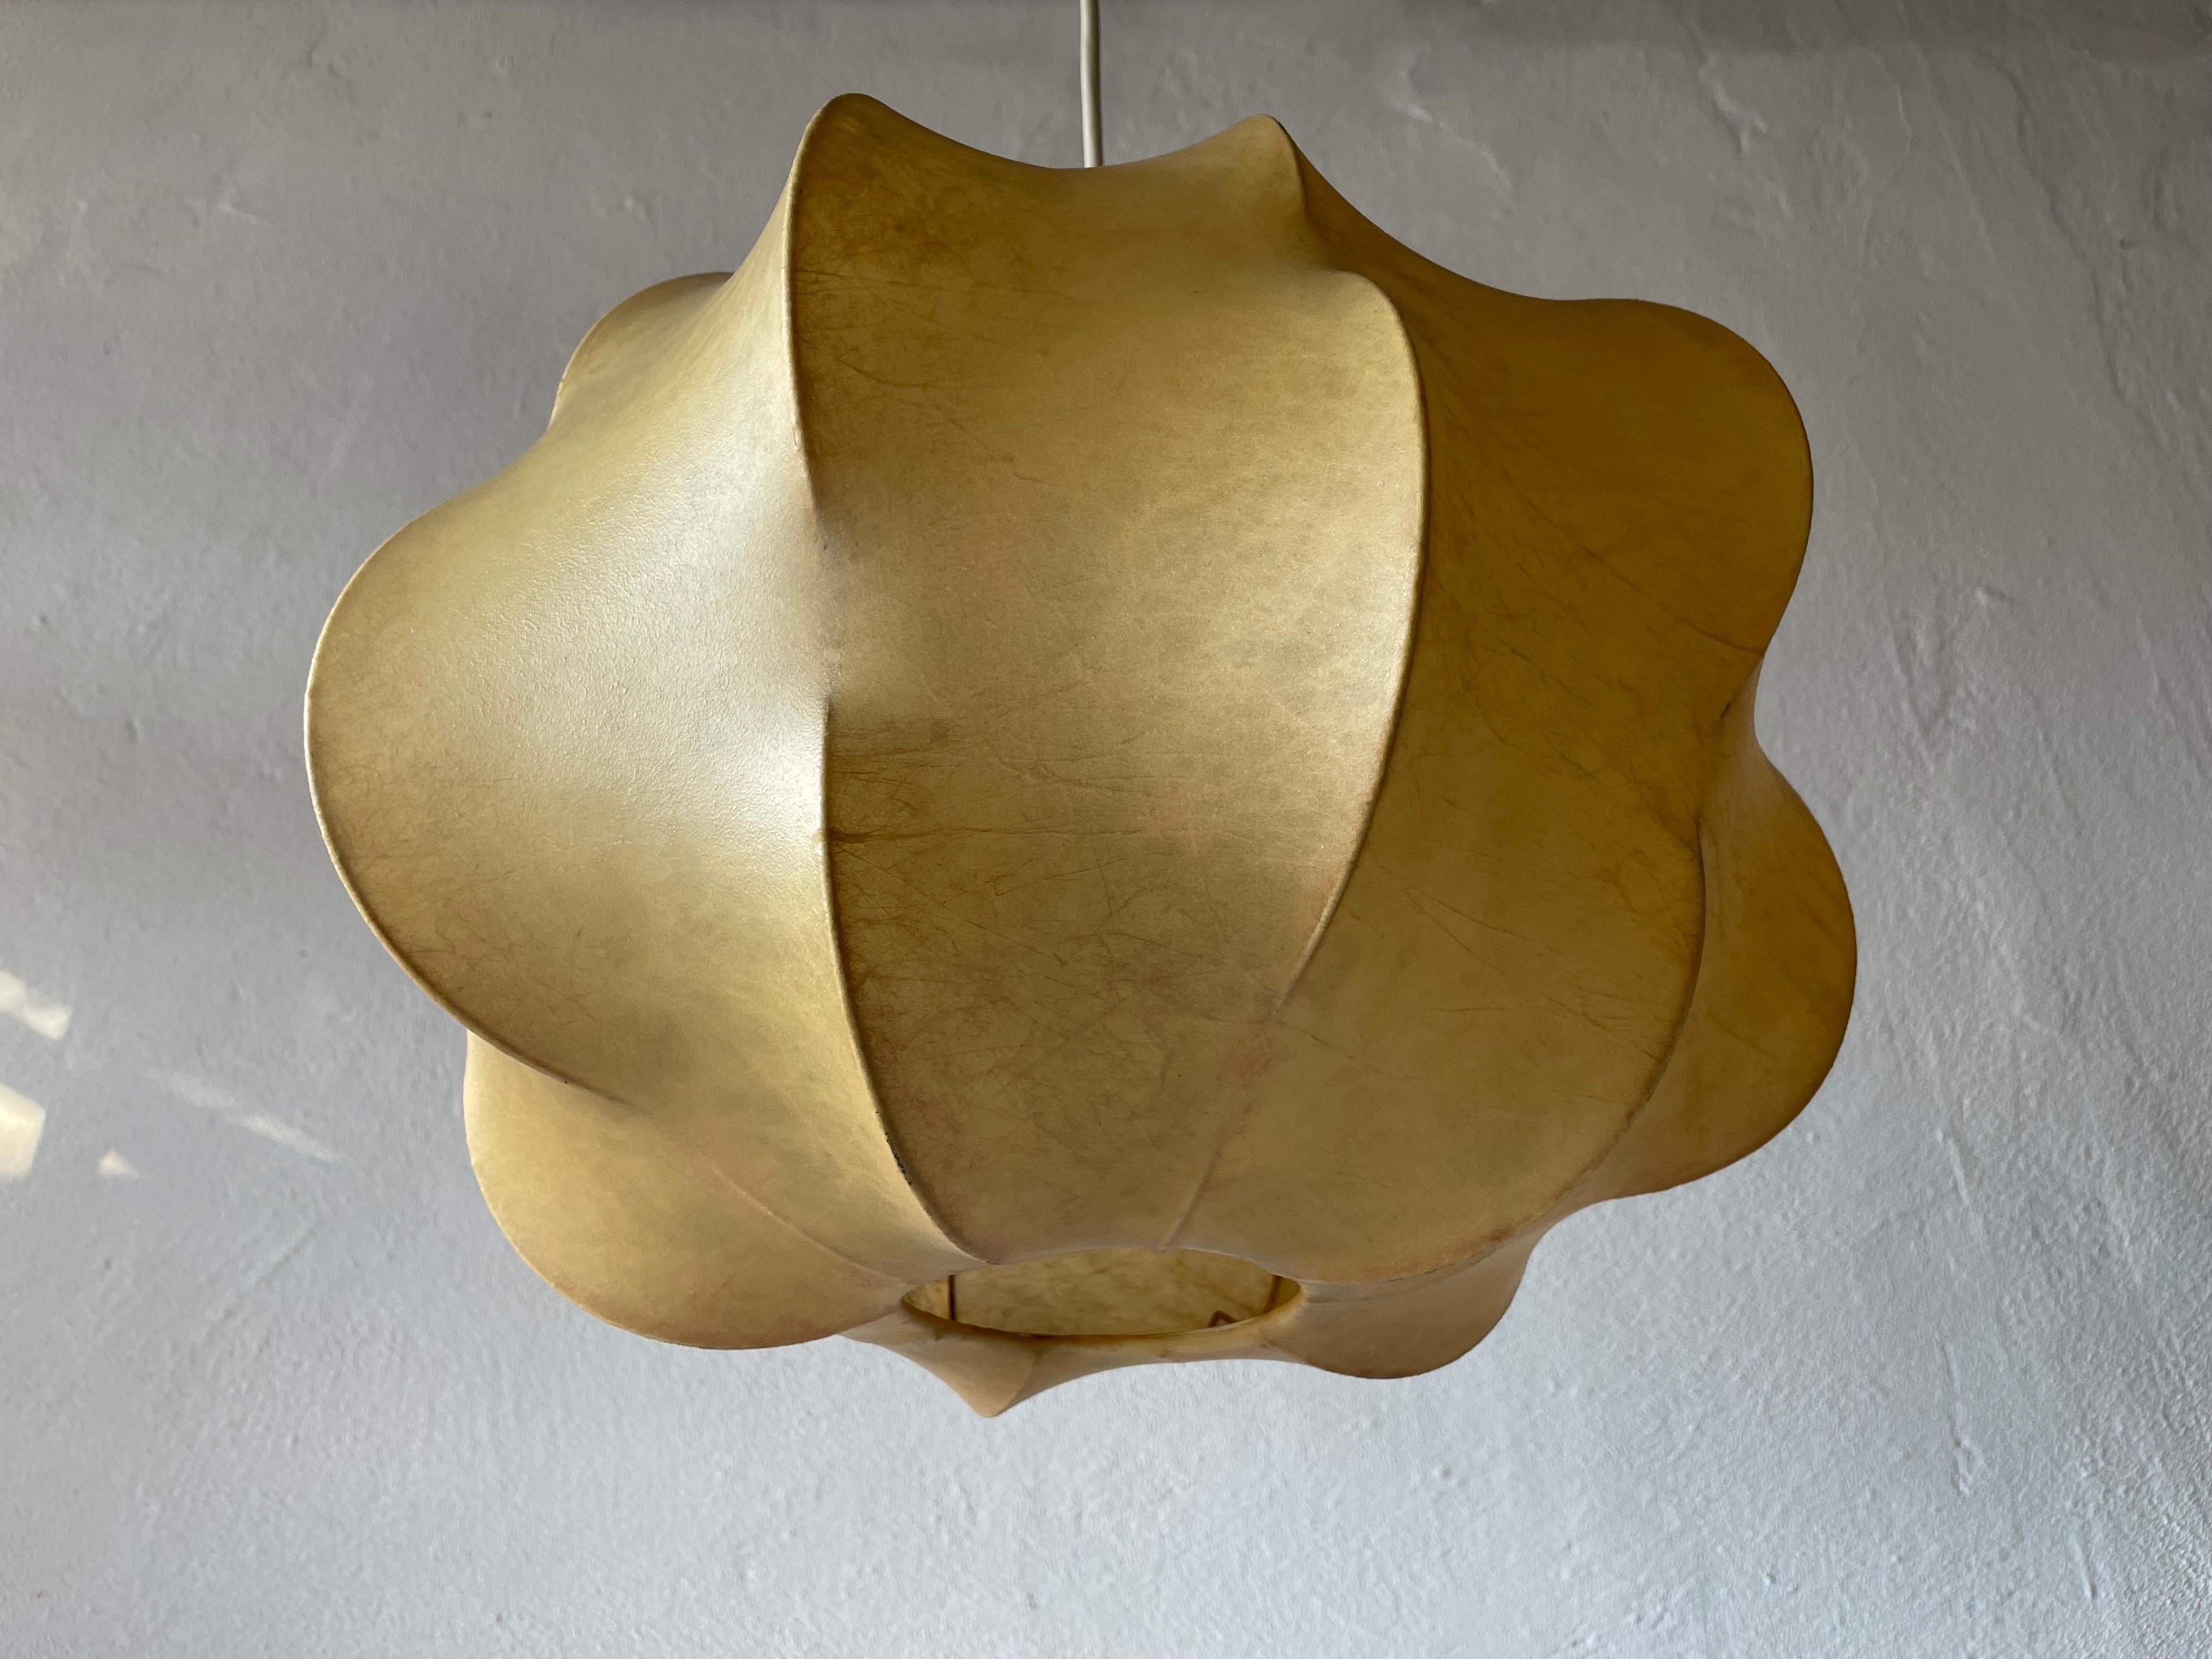 Nuvola model cocoon suspension pendant lamp by Tobia Scarpa for Flos, 1960s, Italy
 
Lampshade is in very good vintage condition.

This lamp works with E27 light bulb. Max 100W
Wired and suitable to use with 220V and 110V for all